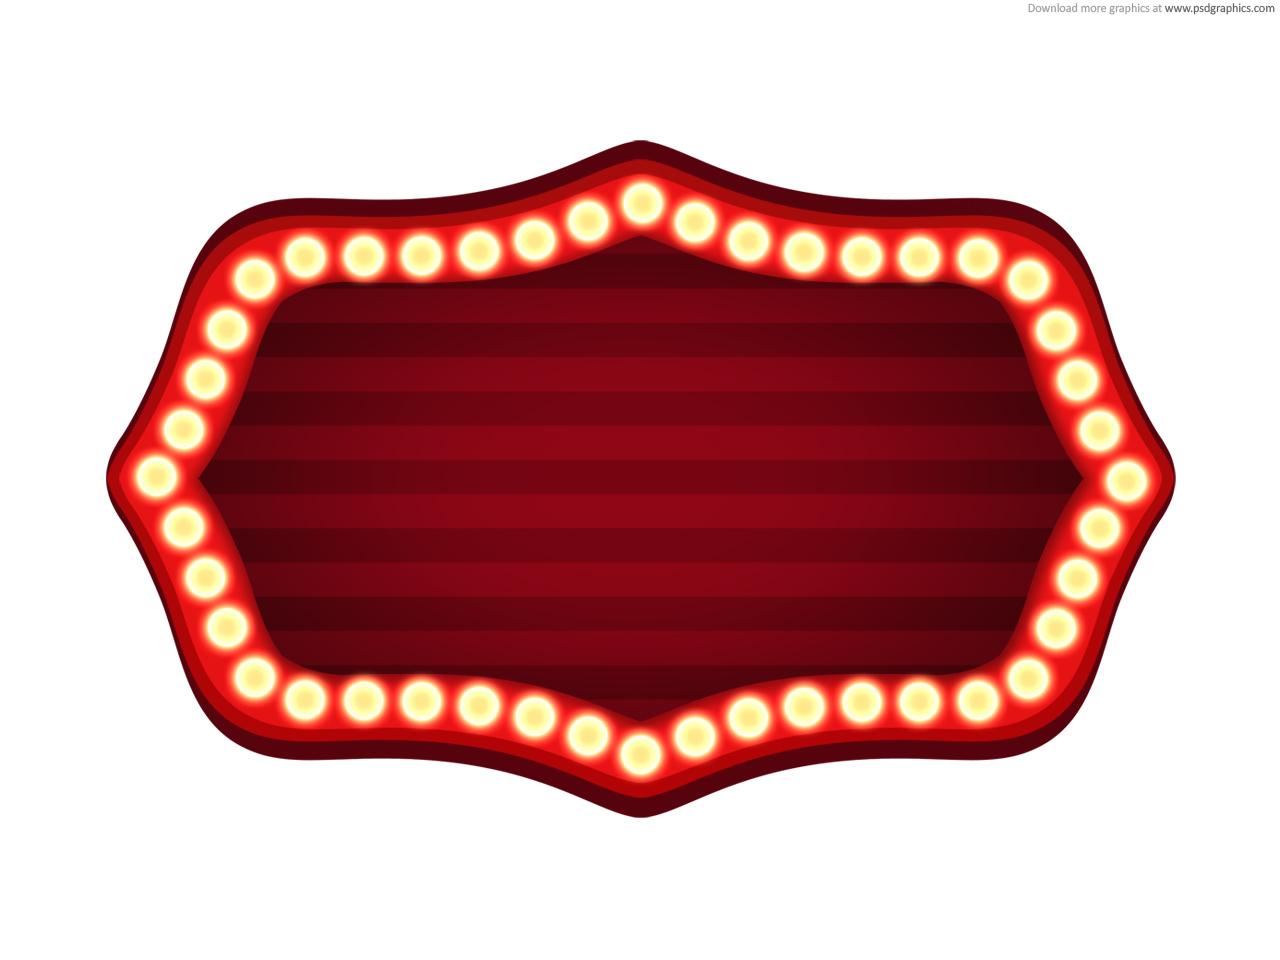 movie theater sign clipart torrent